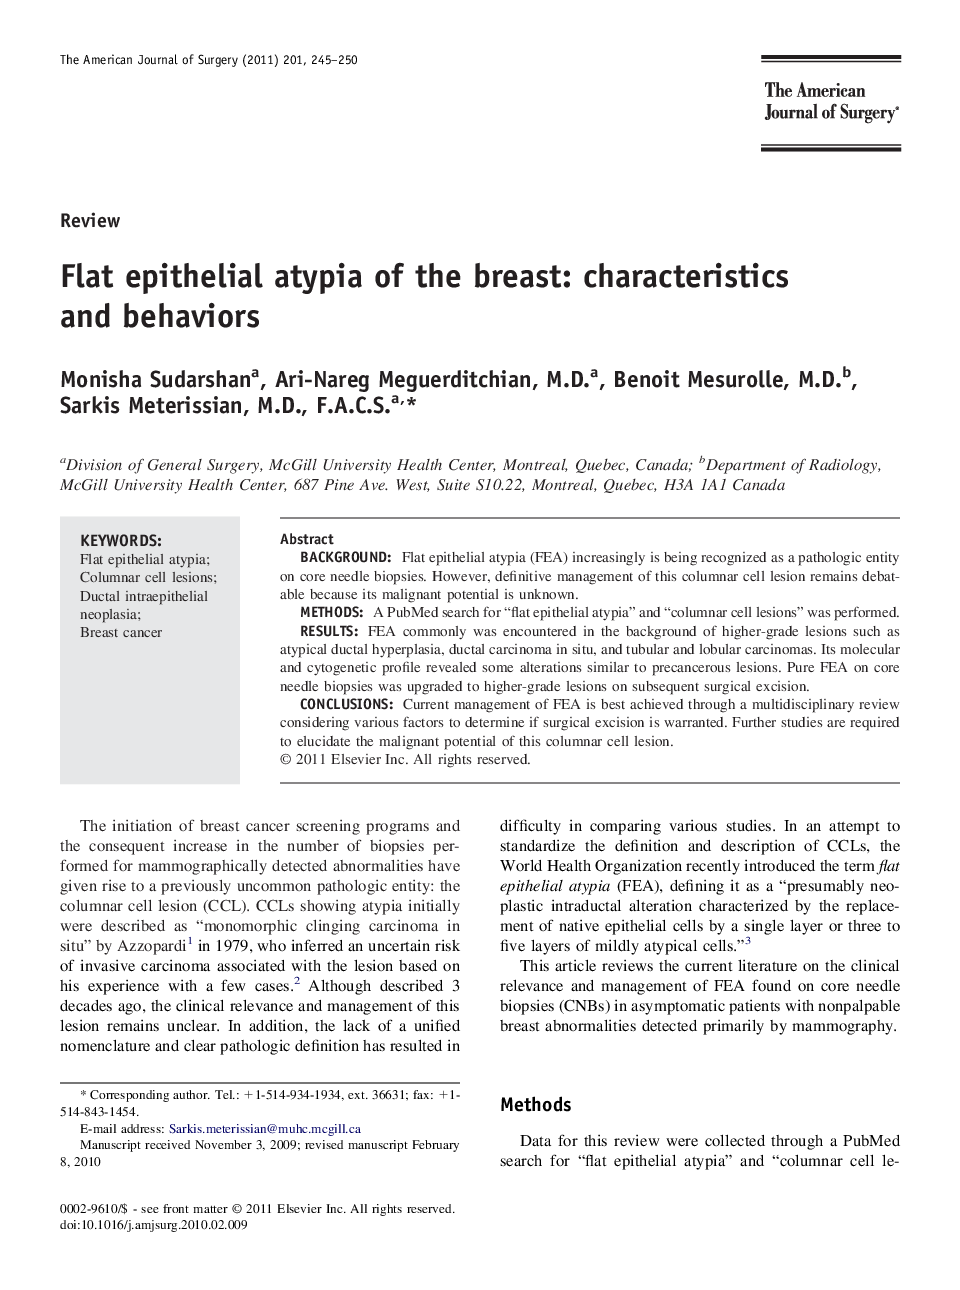 Flat epithelial atypia of the breast: characteristics and behaviors